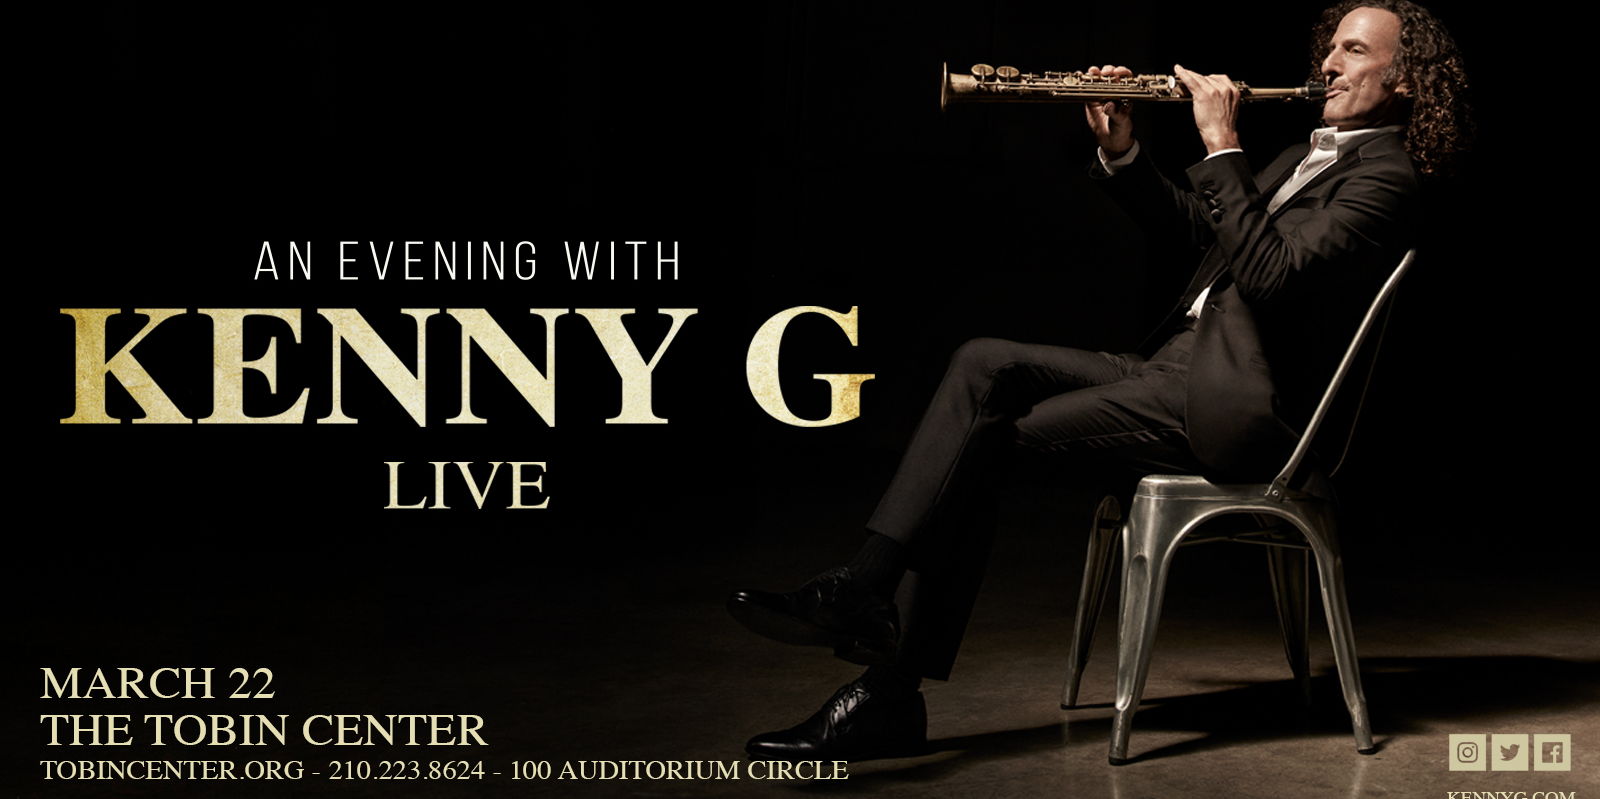 An Evening with Kenny G LIVE promotional image